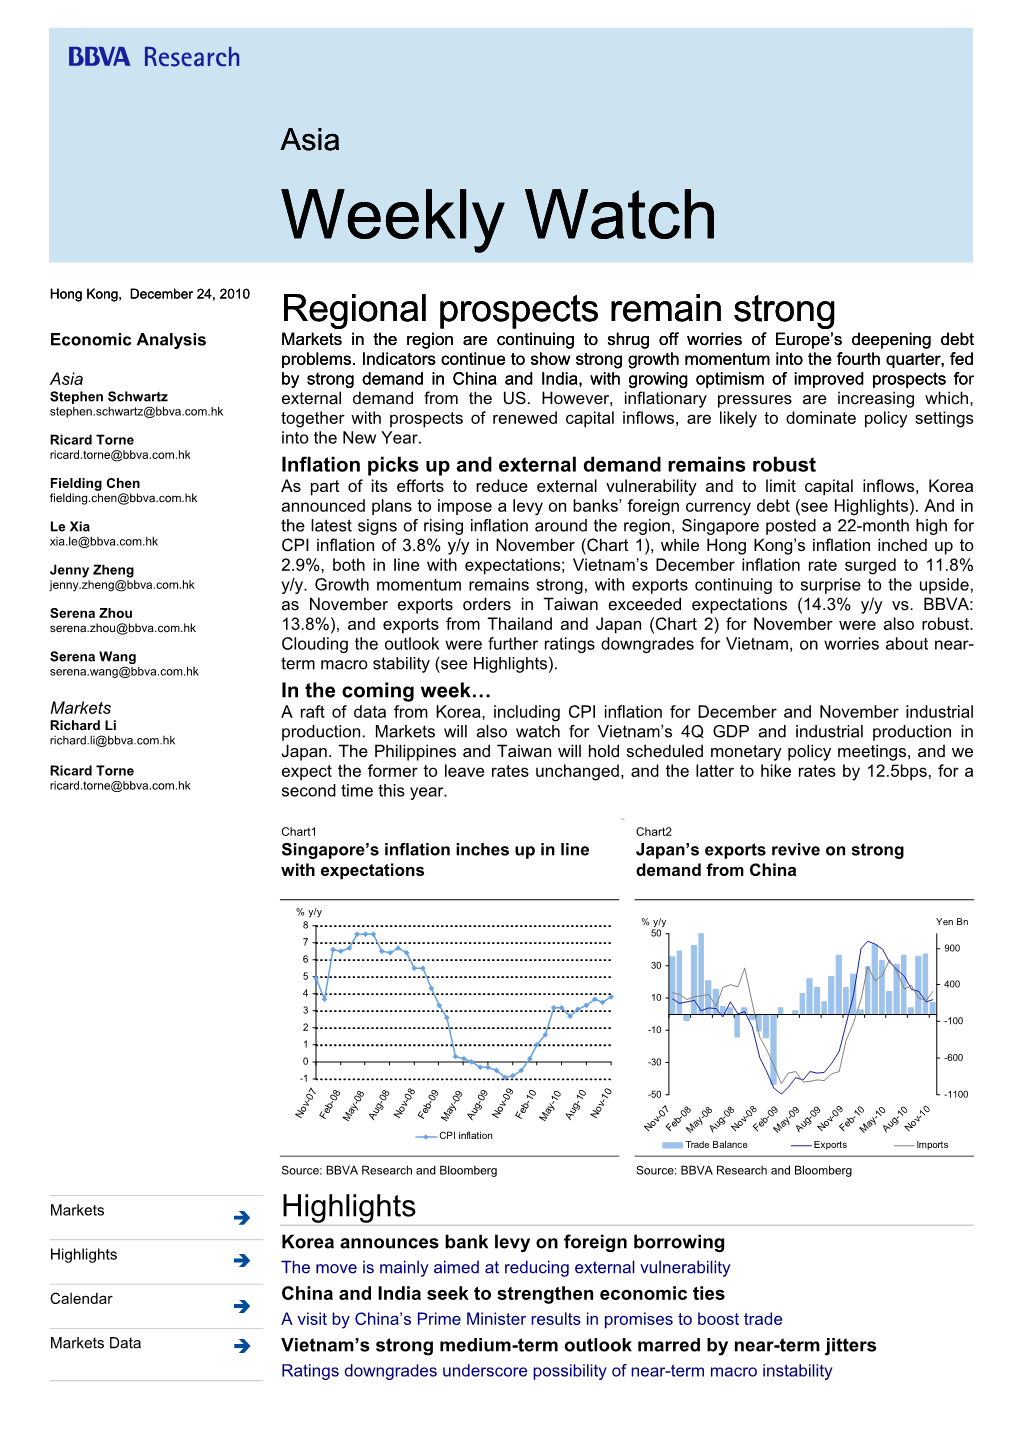 Weekly Watch